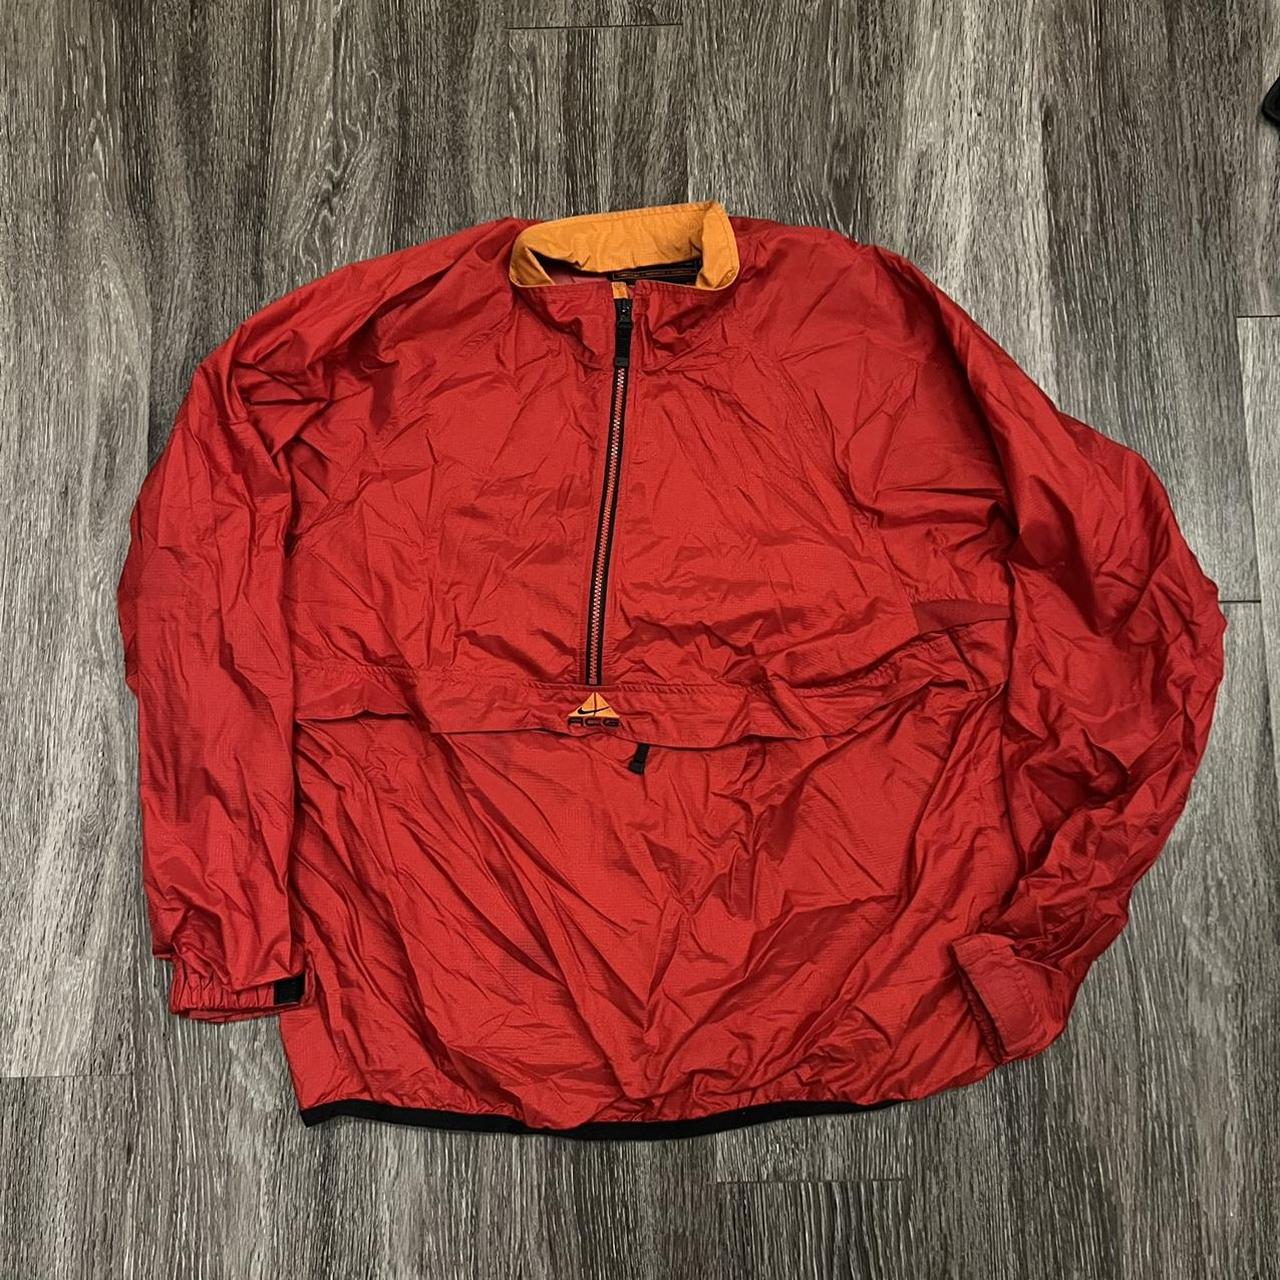 Vintage Nike ACG anorak size XL message me with any... - Depop